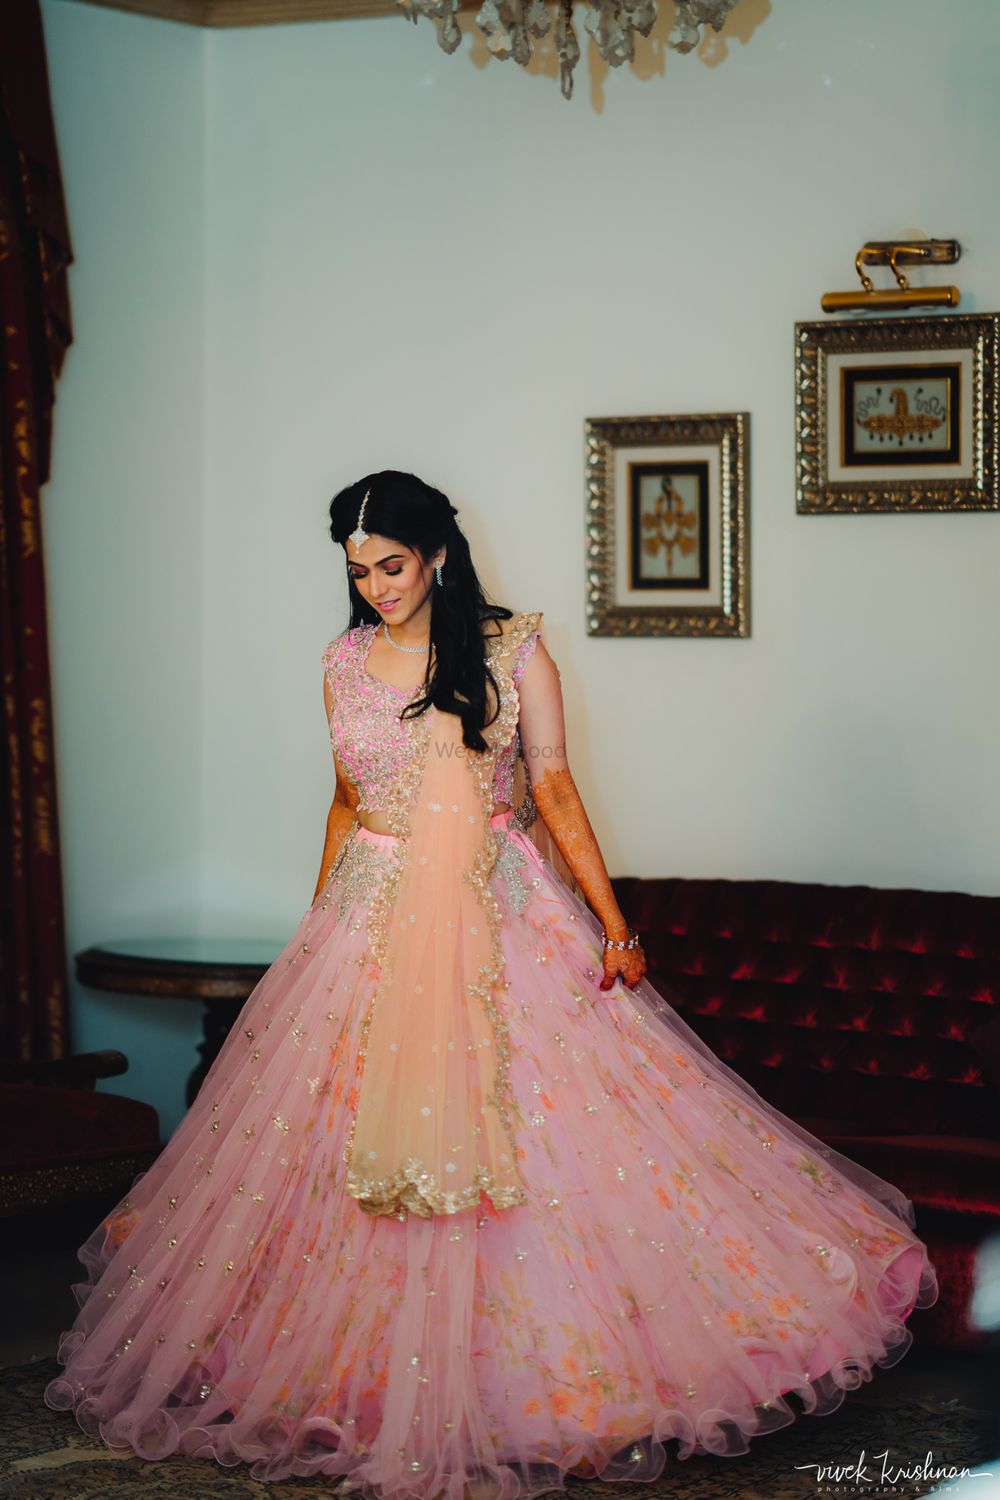 Photo of Bride twirling in her light pink engagement lehenga